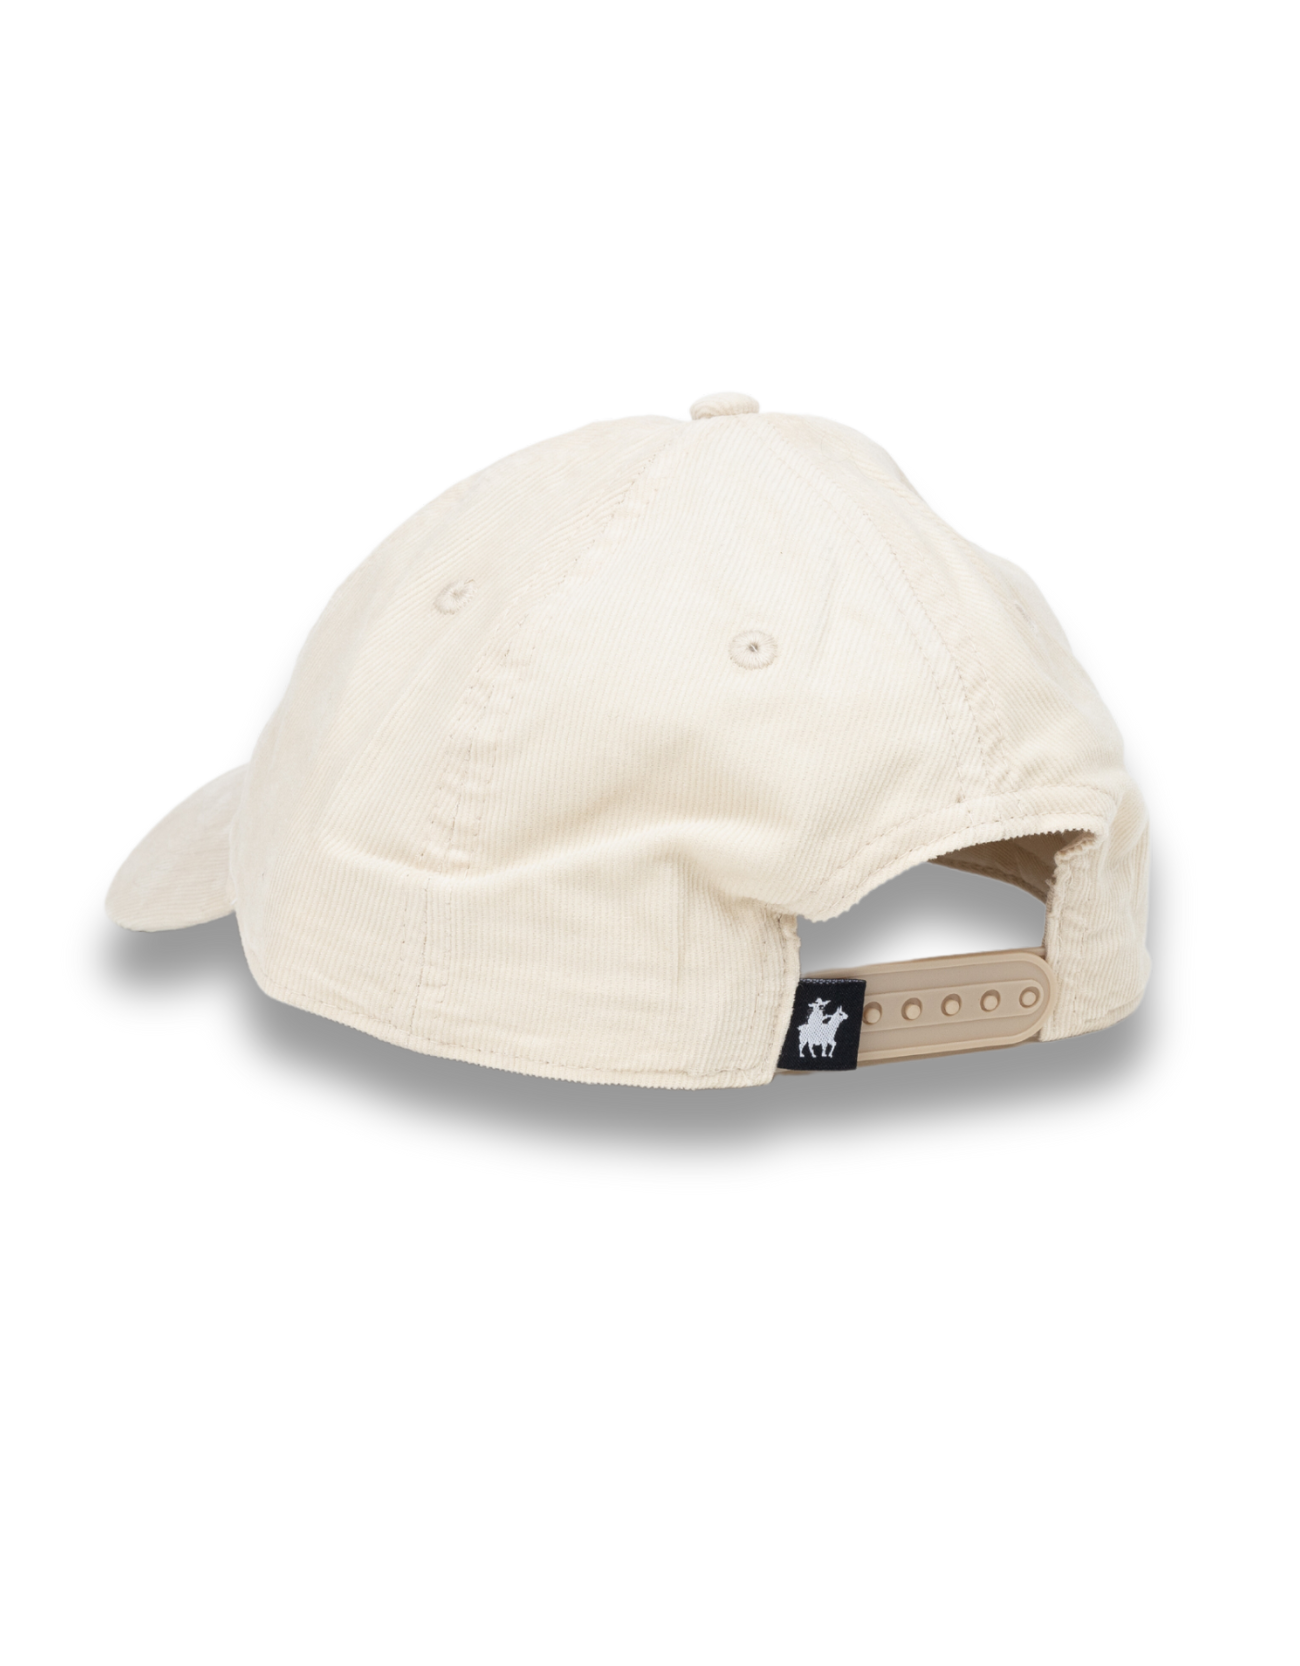 SAY YES SANDY CORDUROY - 6 PANEL SNAP BACK DAD HAT